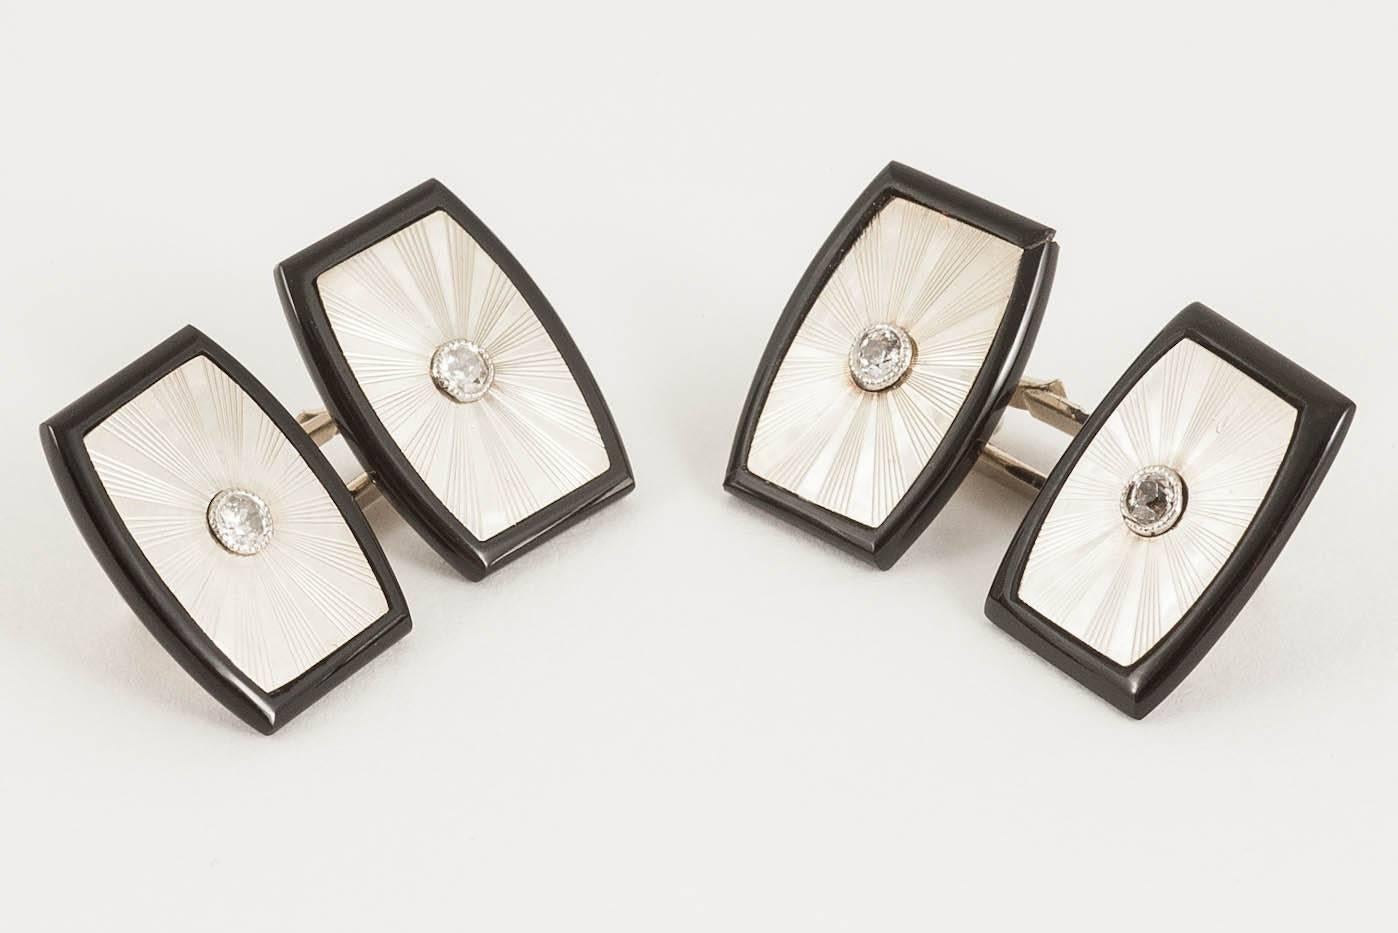 Pair of 18ct white gold mounted onyx cufflinks,the face engraved with a small diamond centre stone,English c,1950